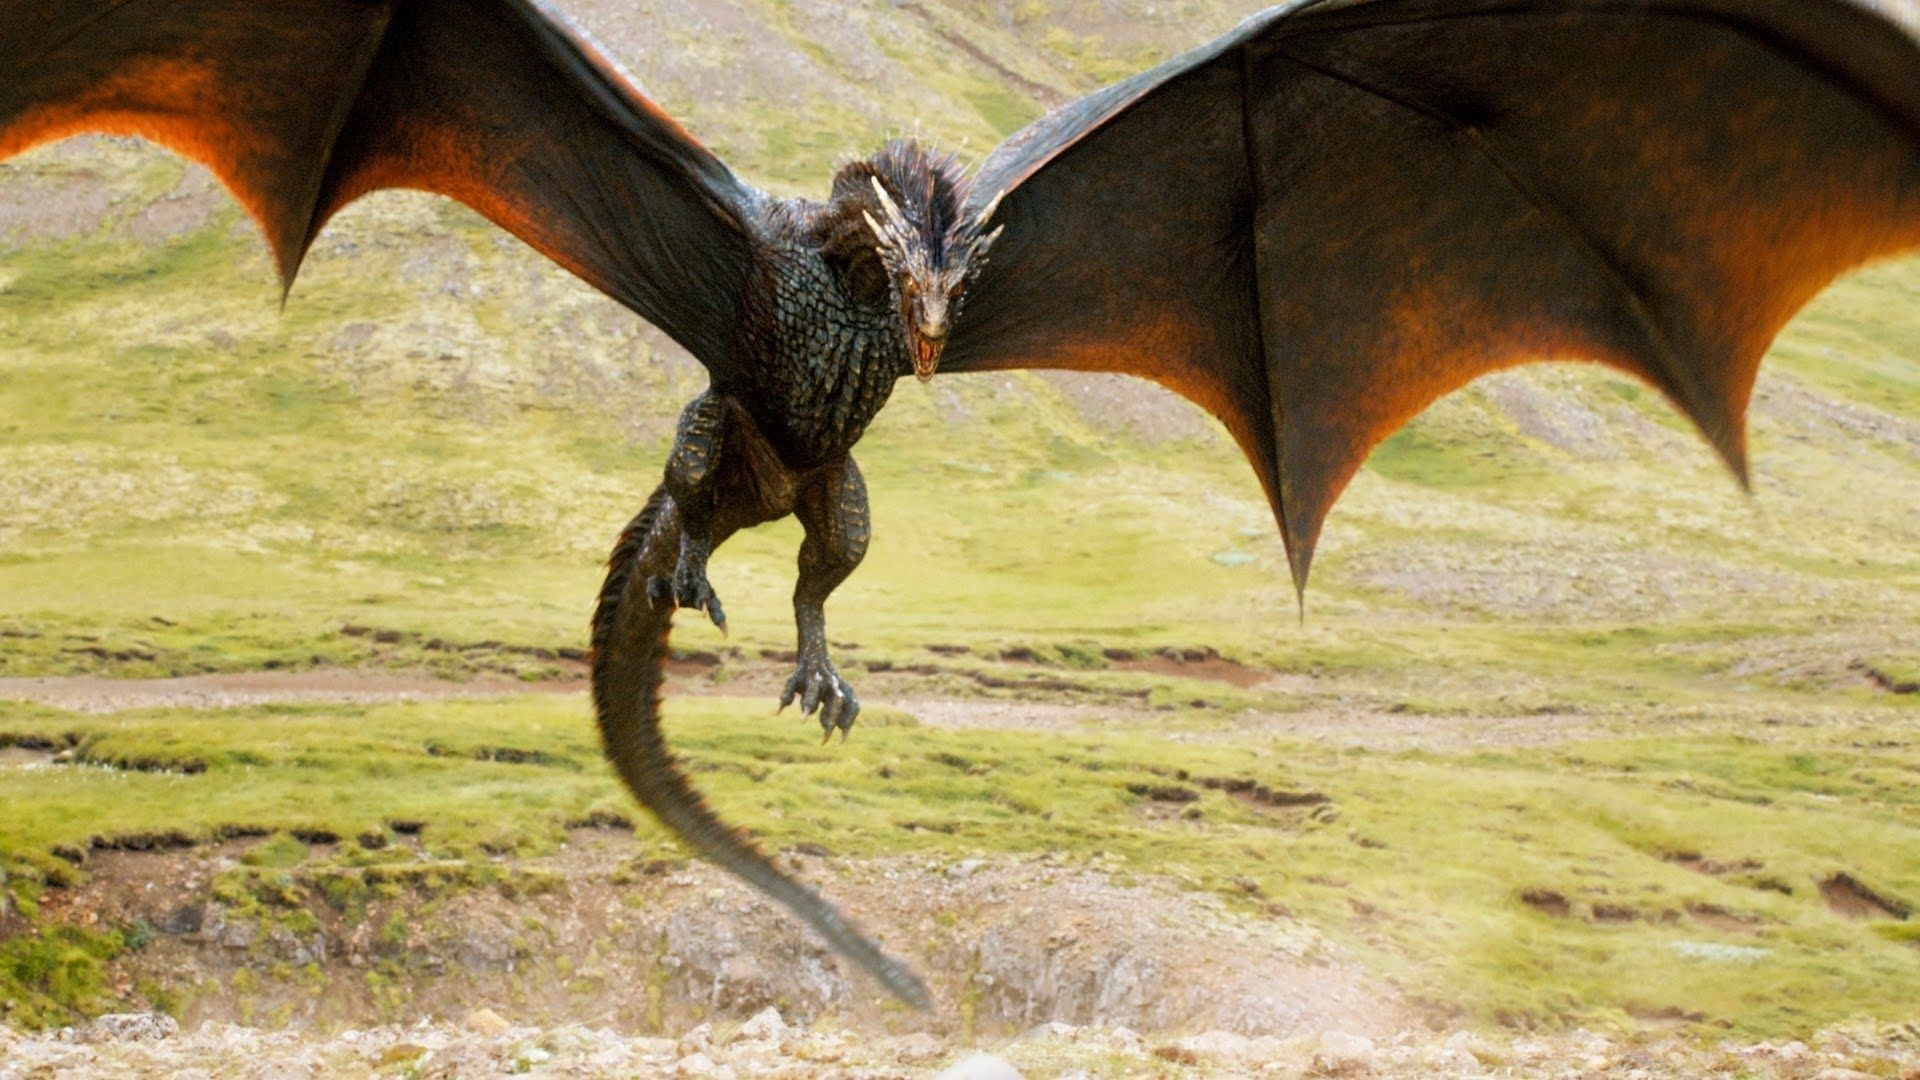 Game of Thrones, Dragon wallpapers, TV shows, Game of Thrones, 1920x1080 Full HD Desktop